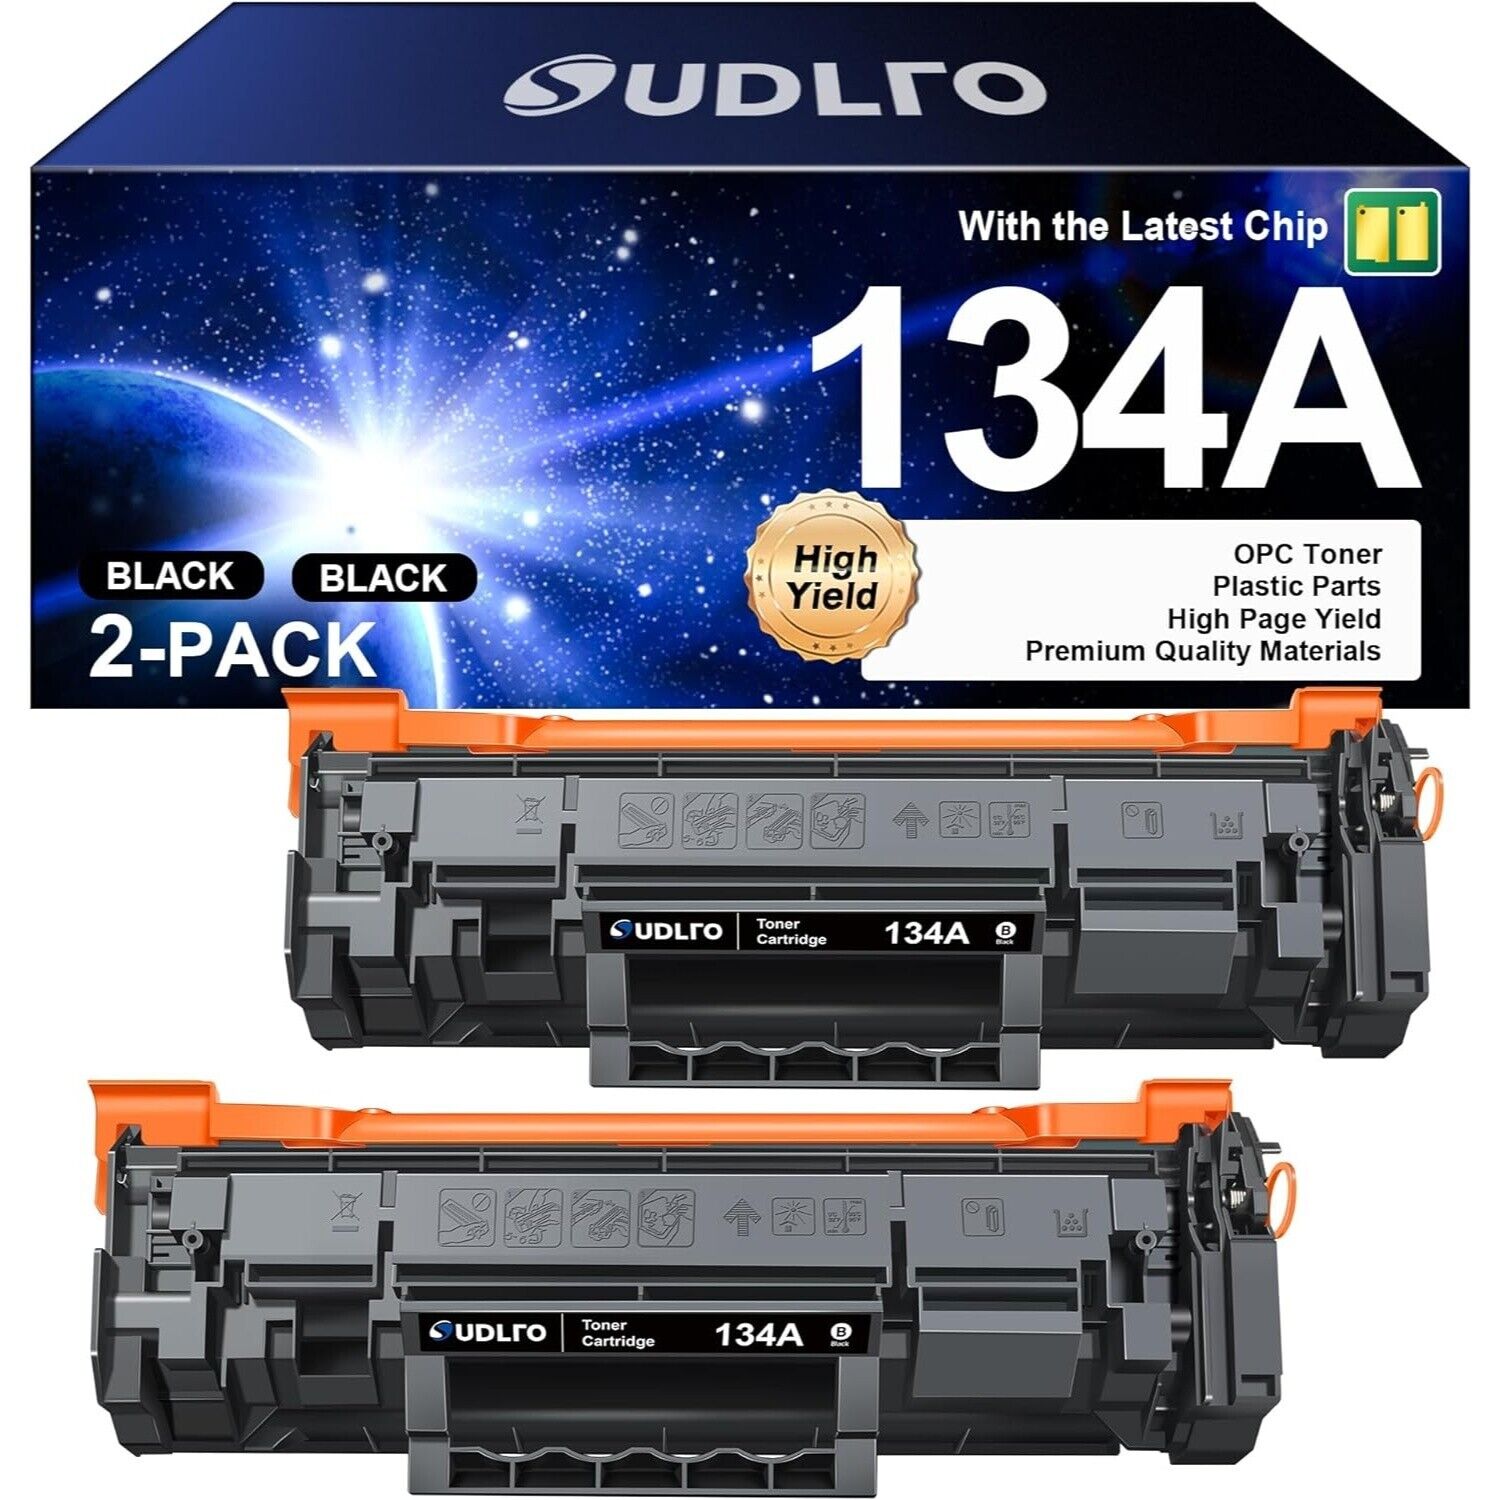 134A Toner Cartridge (with Chip) - Replacement for HP 134A Black Toner Cartridge